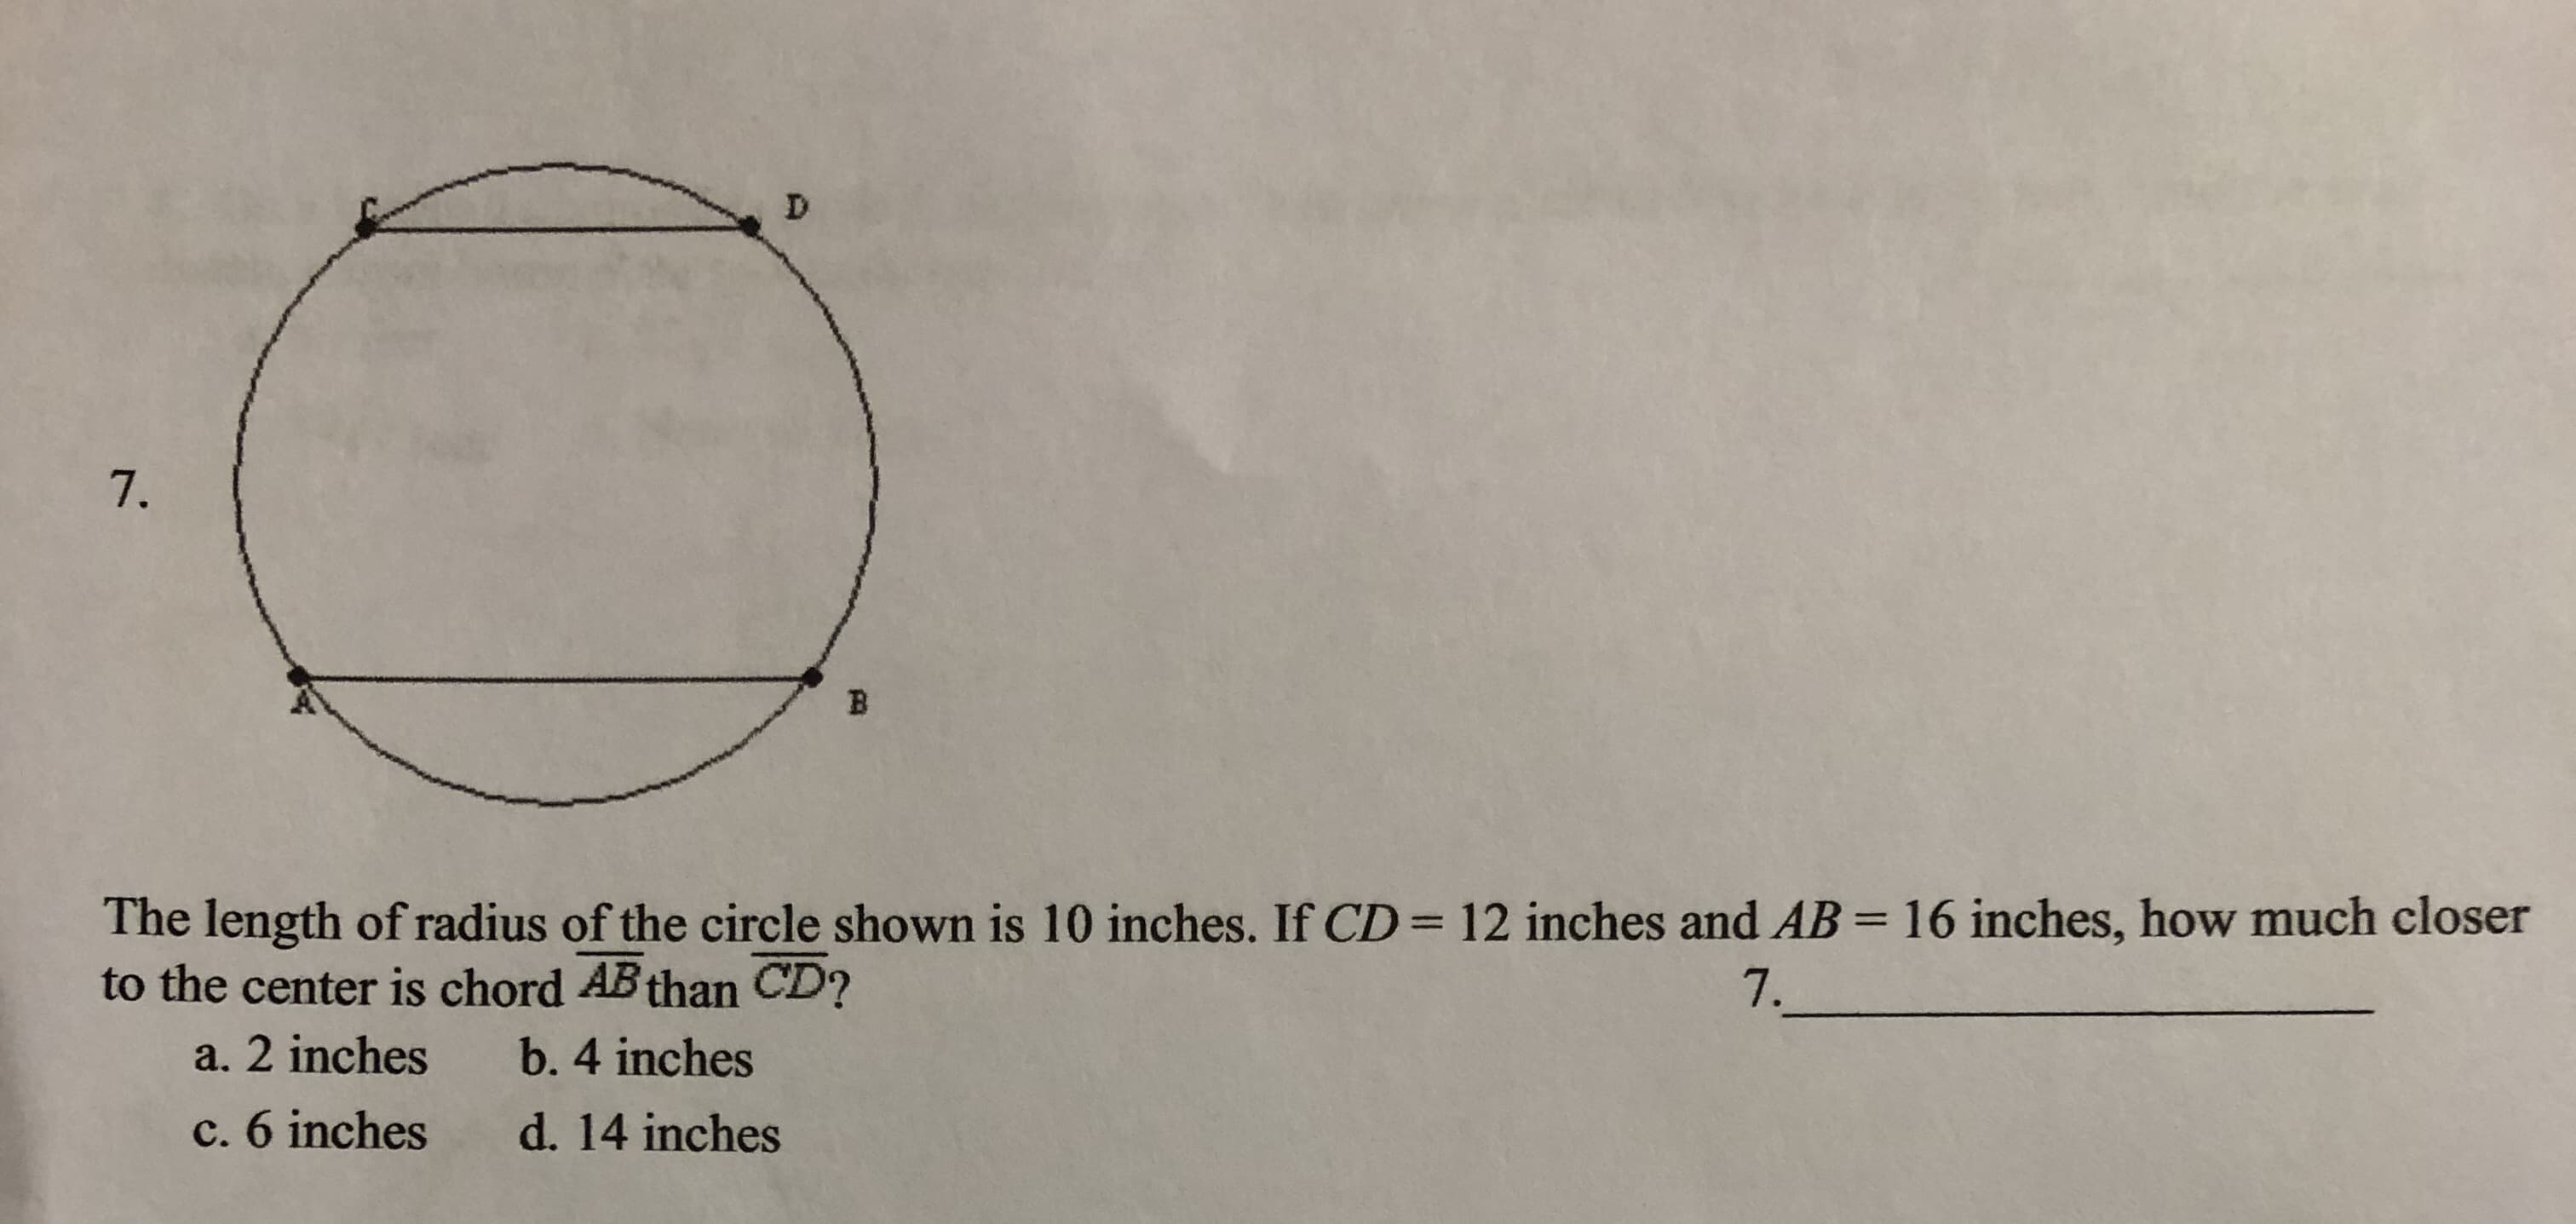 D
7.
B
The length of radius of the circle shown is 10 inches. If CD 12 inches and AB= 16 inches, how much closer
to the center is chord AB than CD?
7.
a. 2 inches
b. 4 inches
c. 6 inches
d. 14 inches
